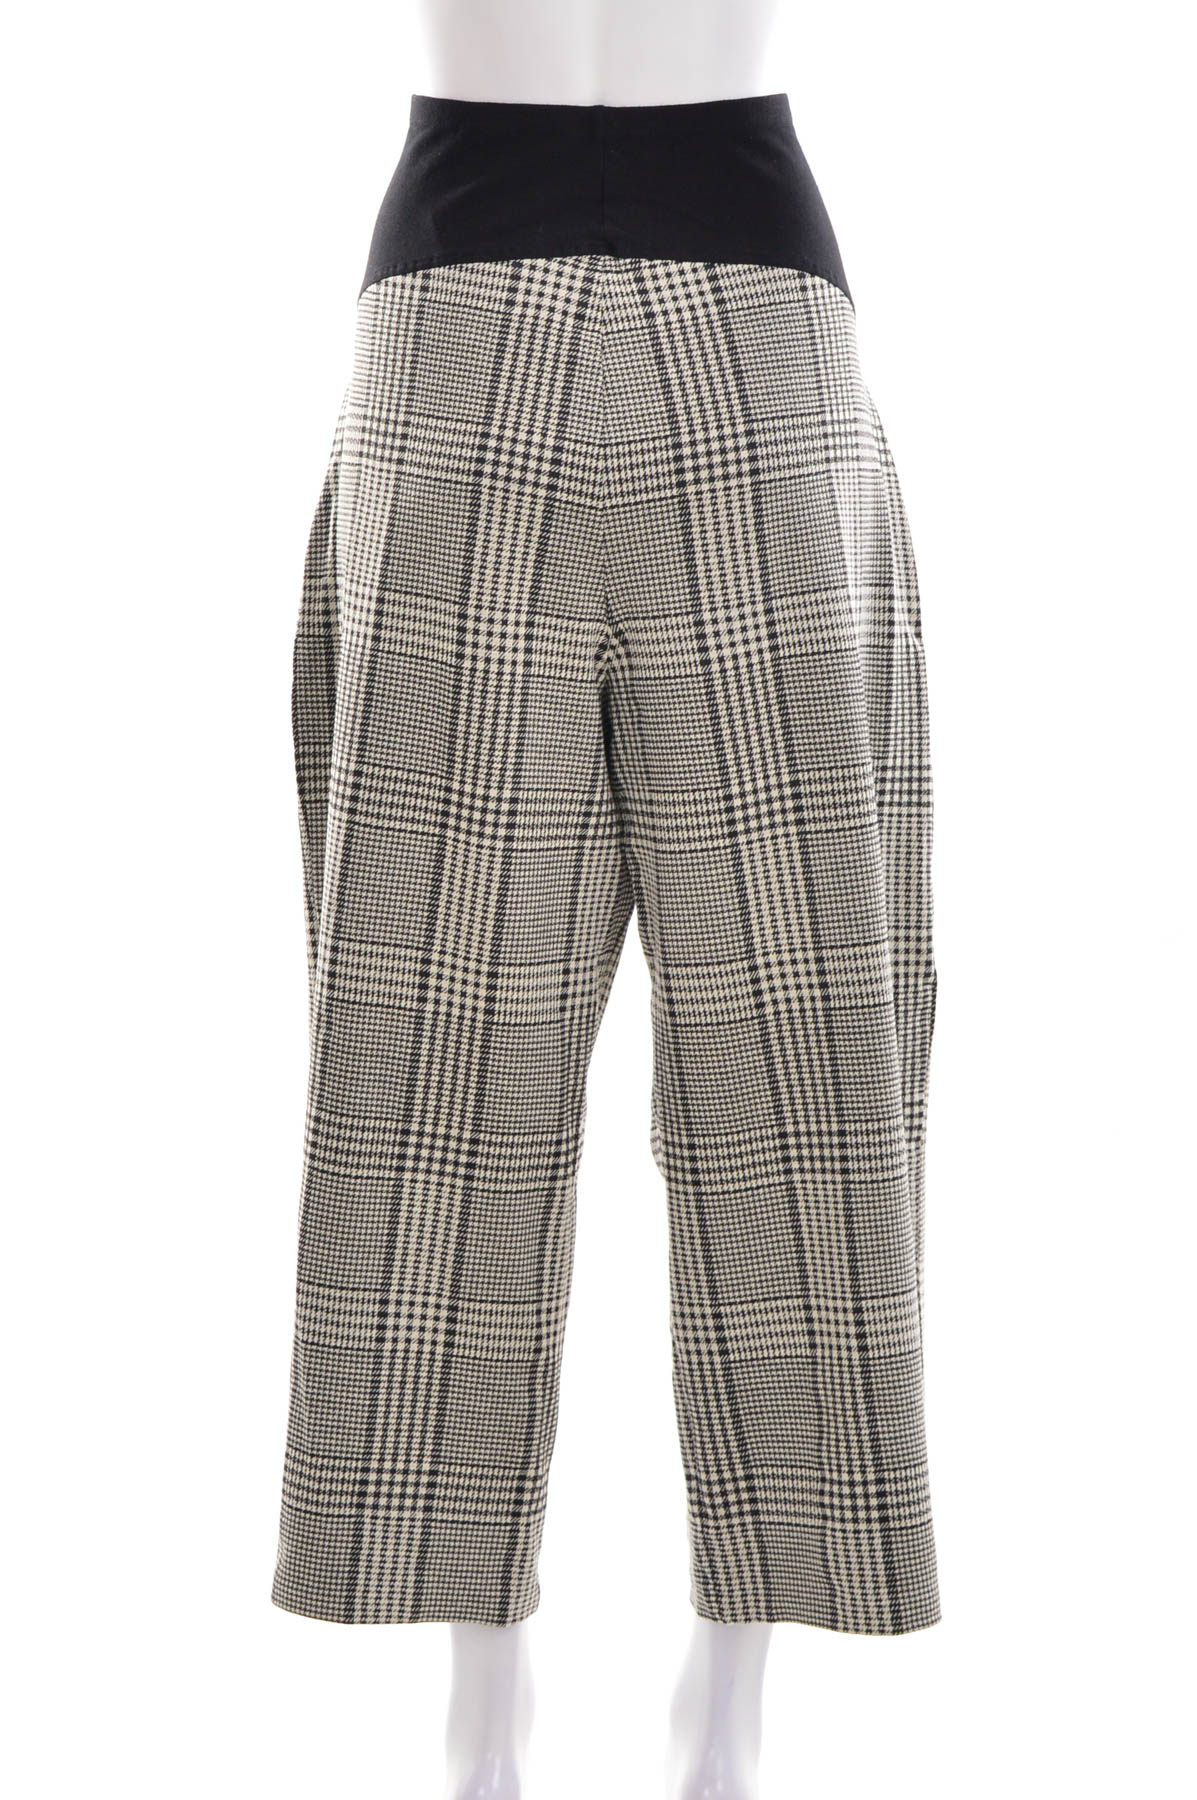 Women's trousers for pregnant women - H&M MAMA - 1